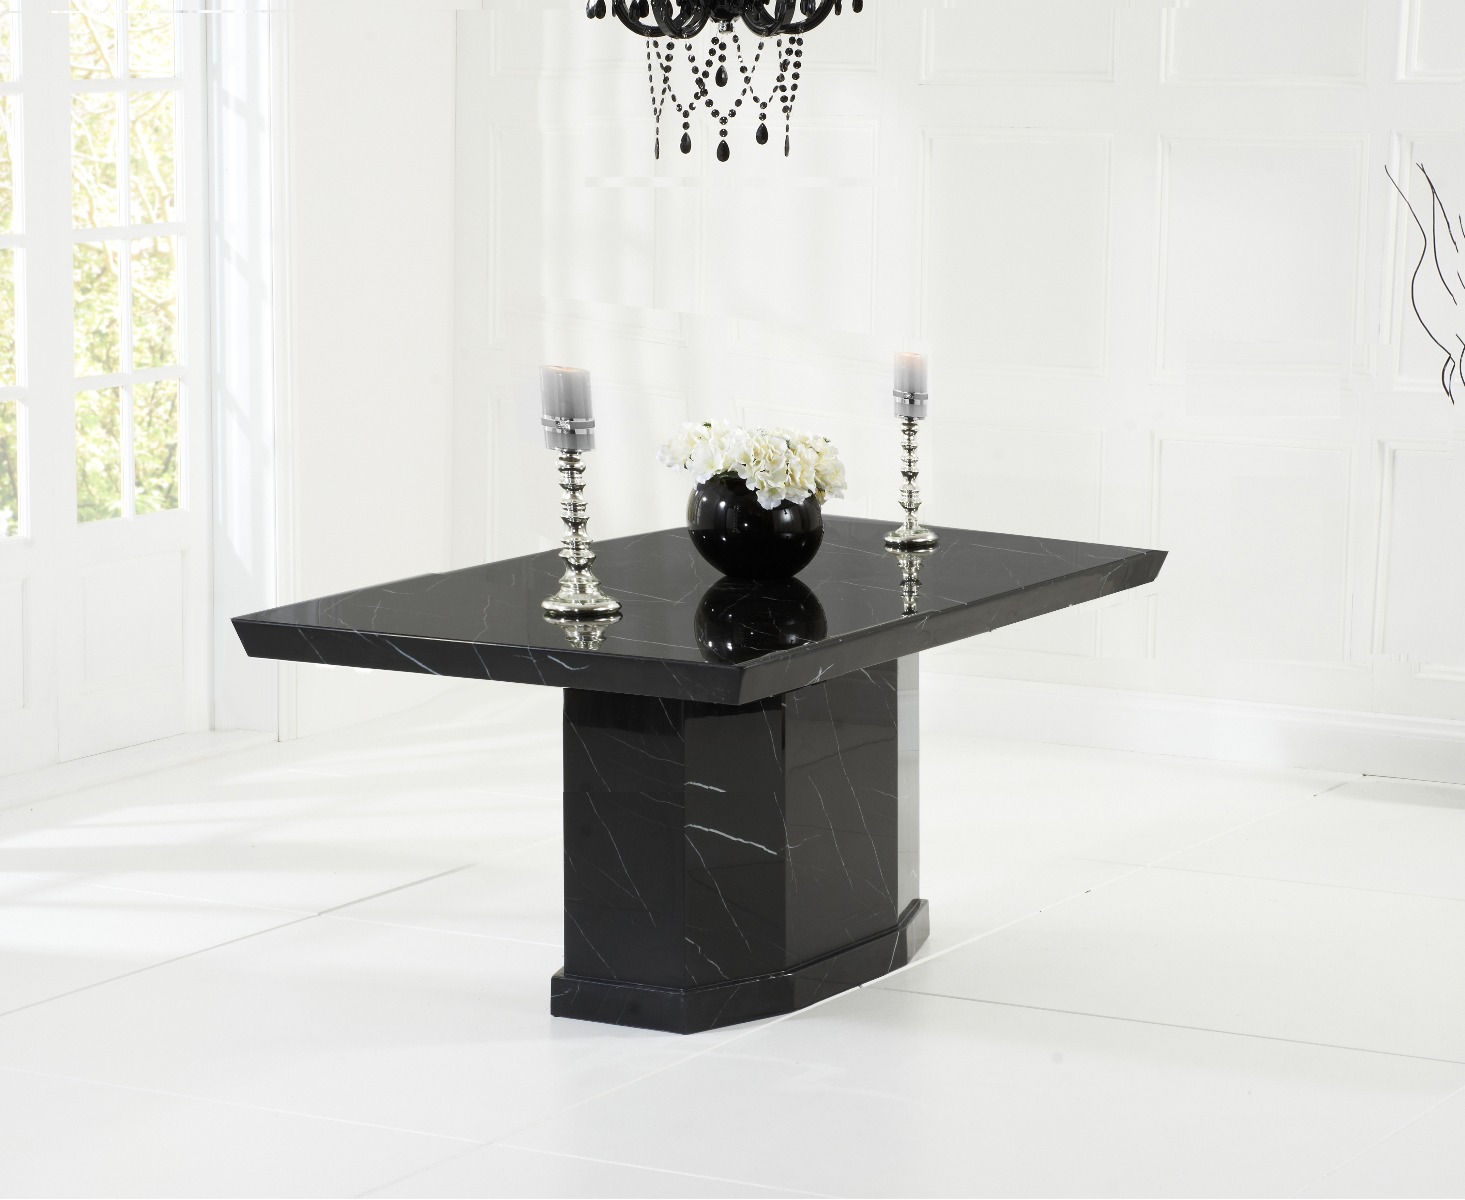 Photo 4 of Carvelle 160cm black pedestal marble dining table with 4 black novara chairs